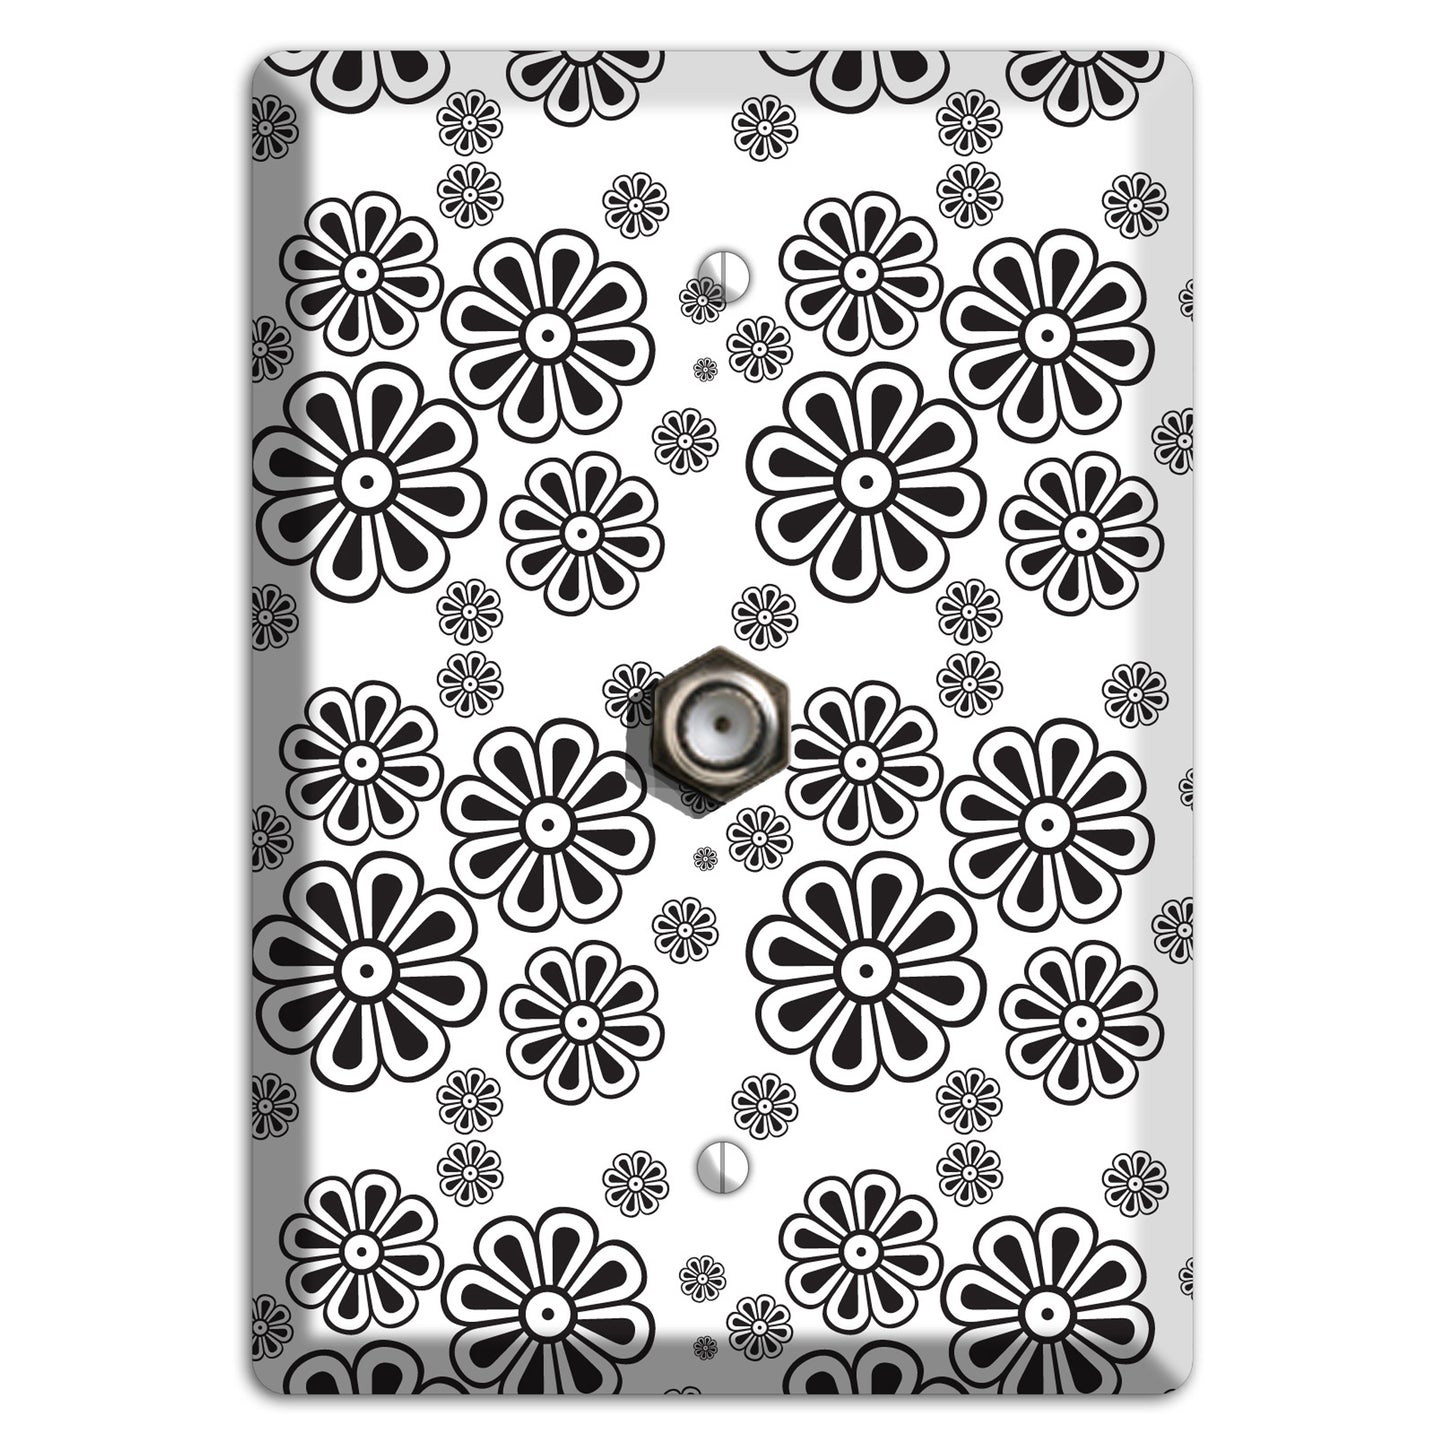 White With Black Small Retro Floral Contour Cable Wallplate